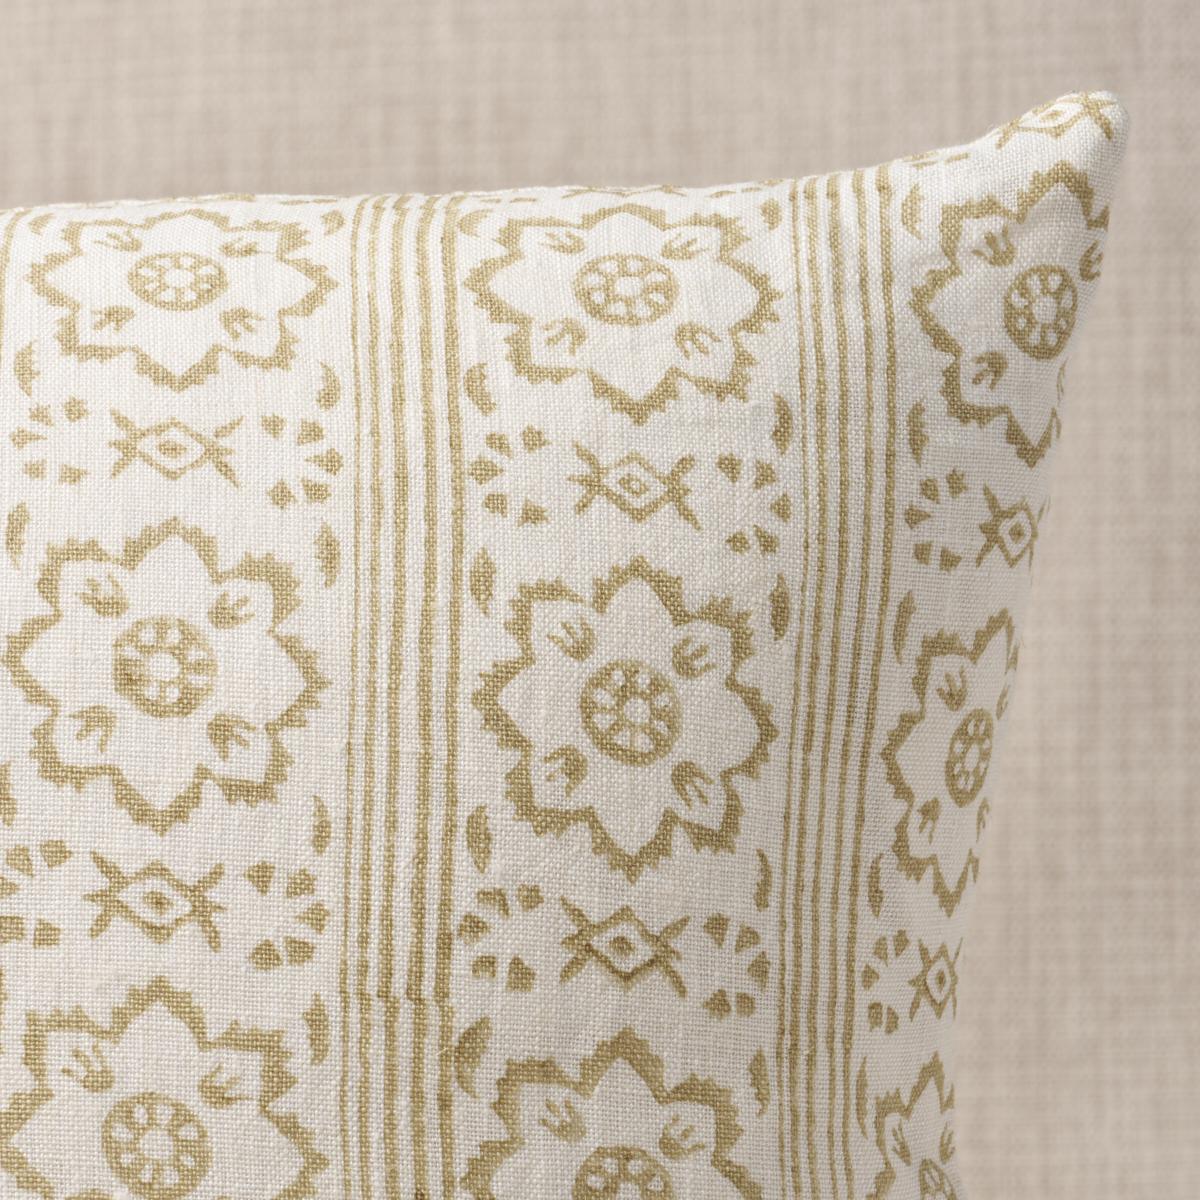 This pillow features Sunda Hand Blocked Print with a knife edge finish. This soft geometric pattern is printed by hand on 100% linen using traditional carved wood blocks. With its appealing combination of stripes and medallions, Sunda Hand-Blocked